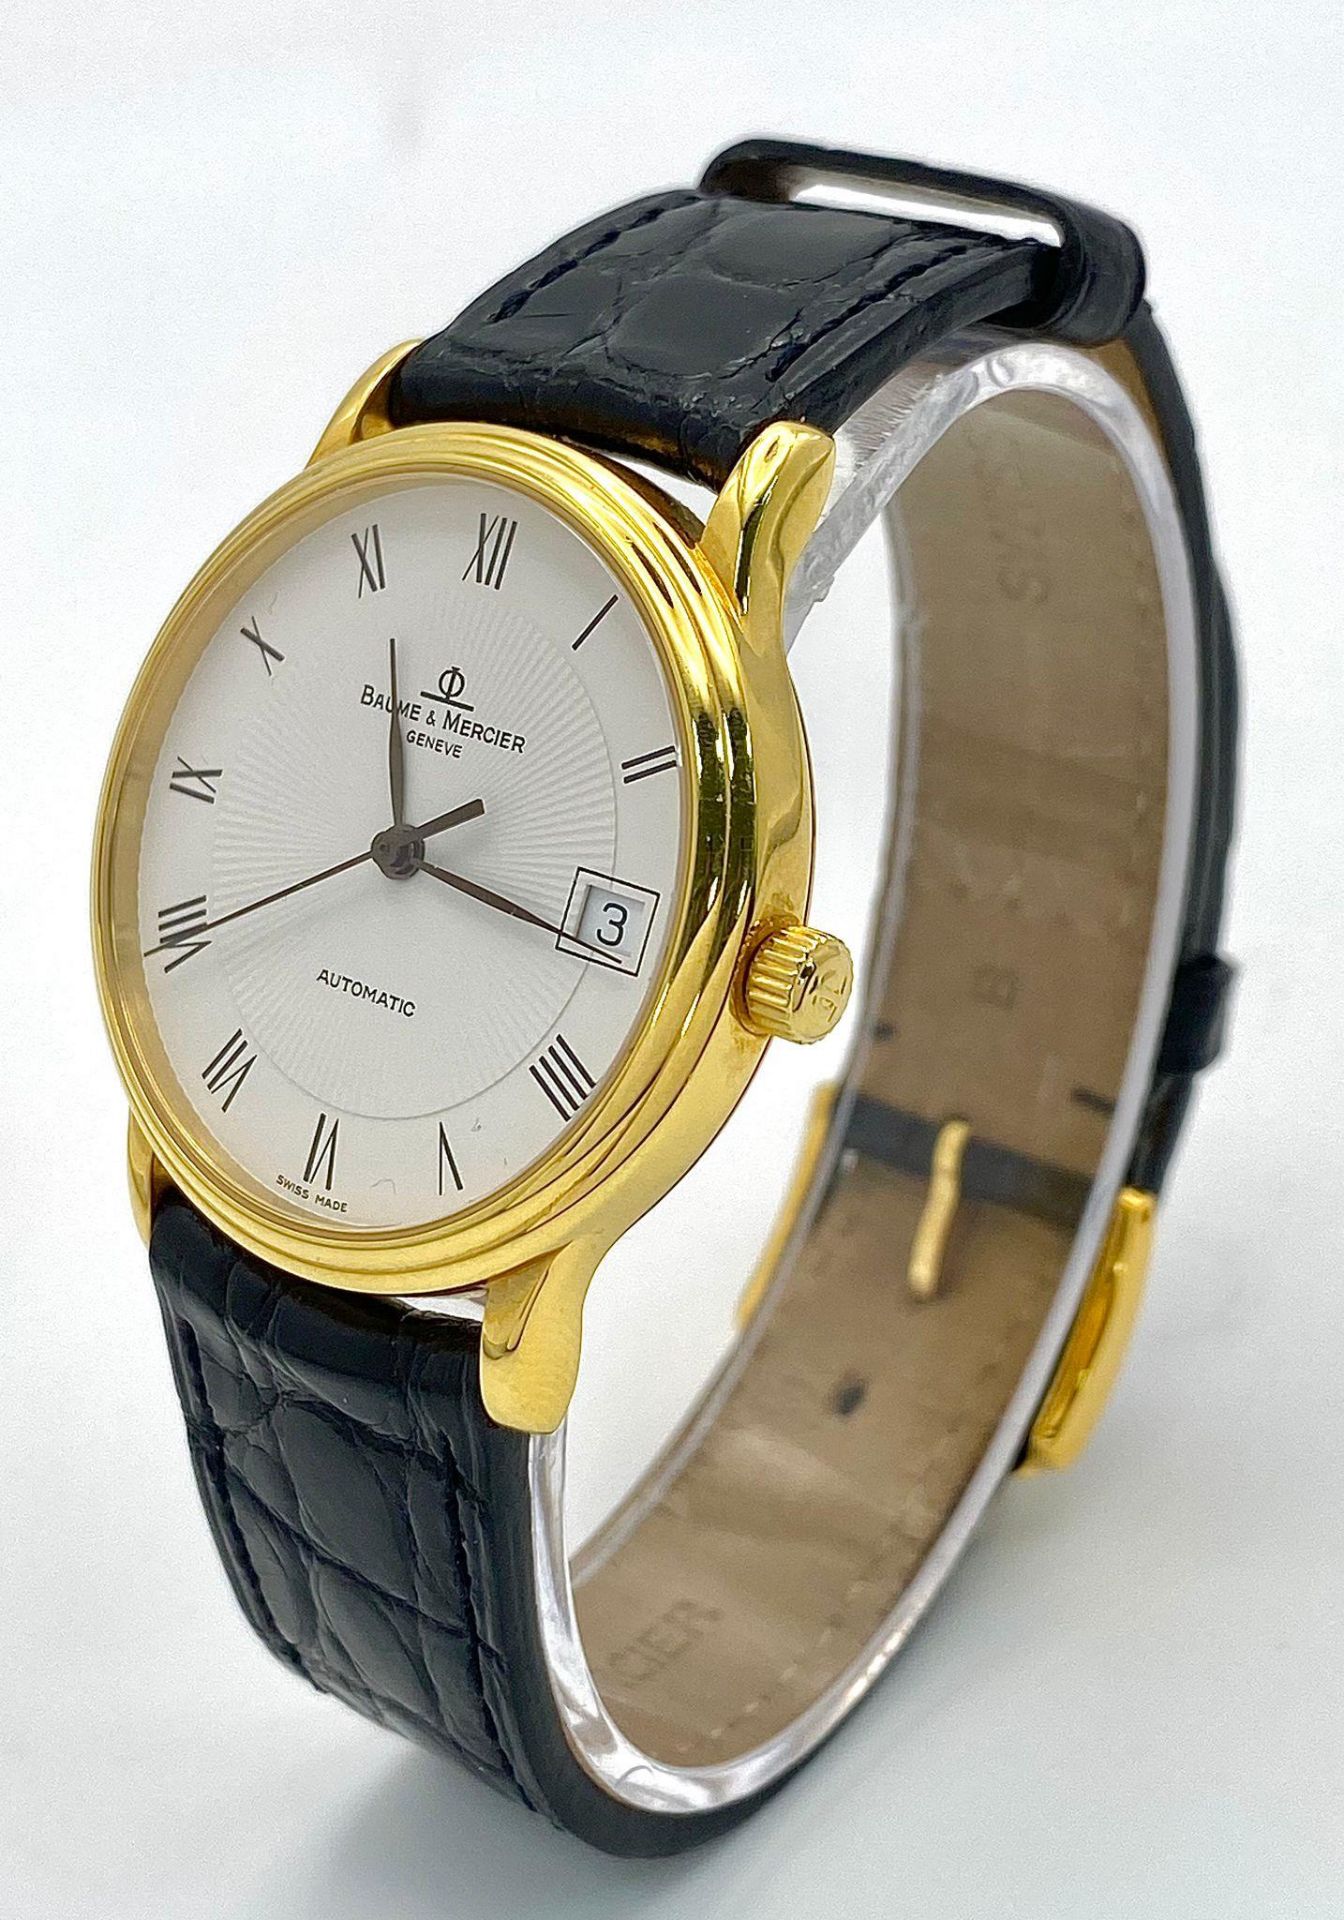 A Baume and Mercier 18K Gold Cased Automatic Gents Watch. Model - MV045075. Black leather strap. 18k